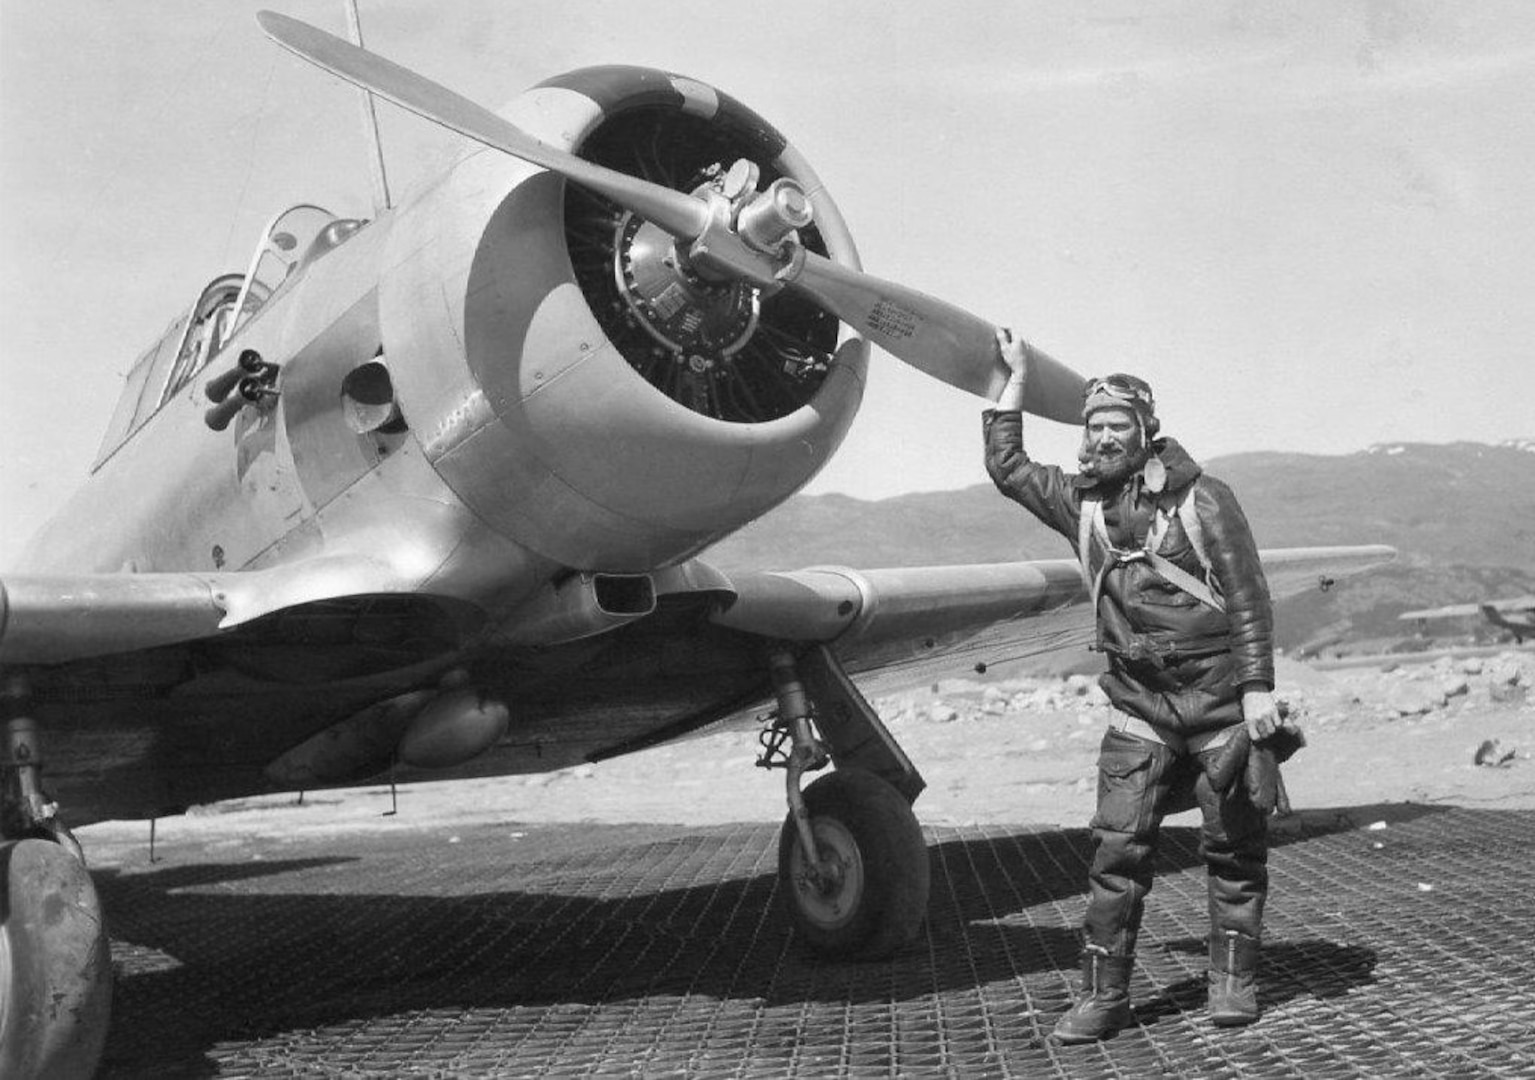 Radioman First Class Benjamin Bottoms in flight gear posed in front of a military trainer aircraft. (Family of Olga Bottoms Richardson)